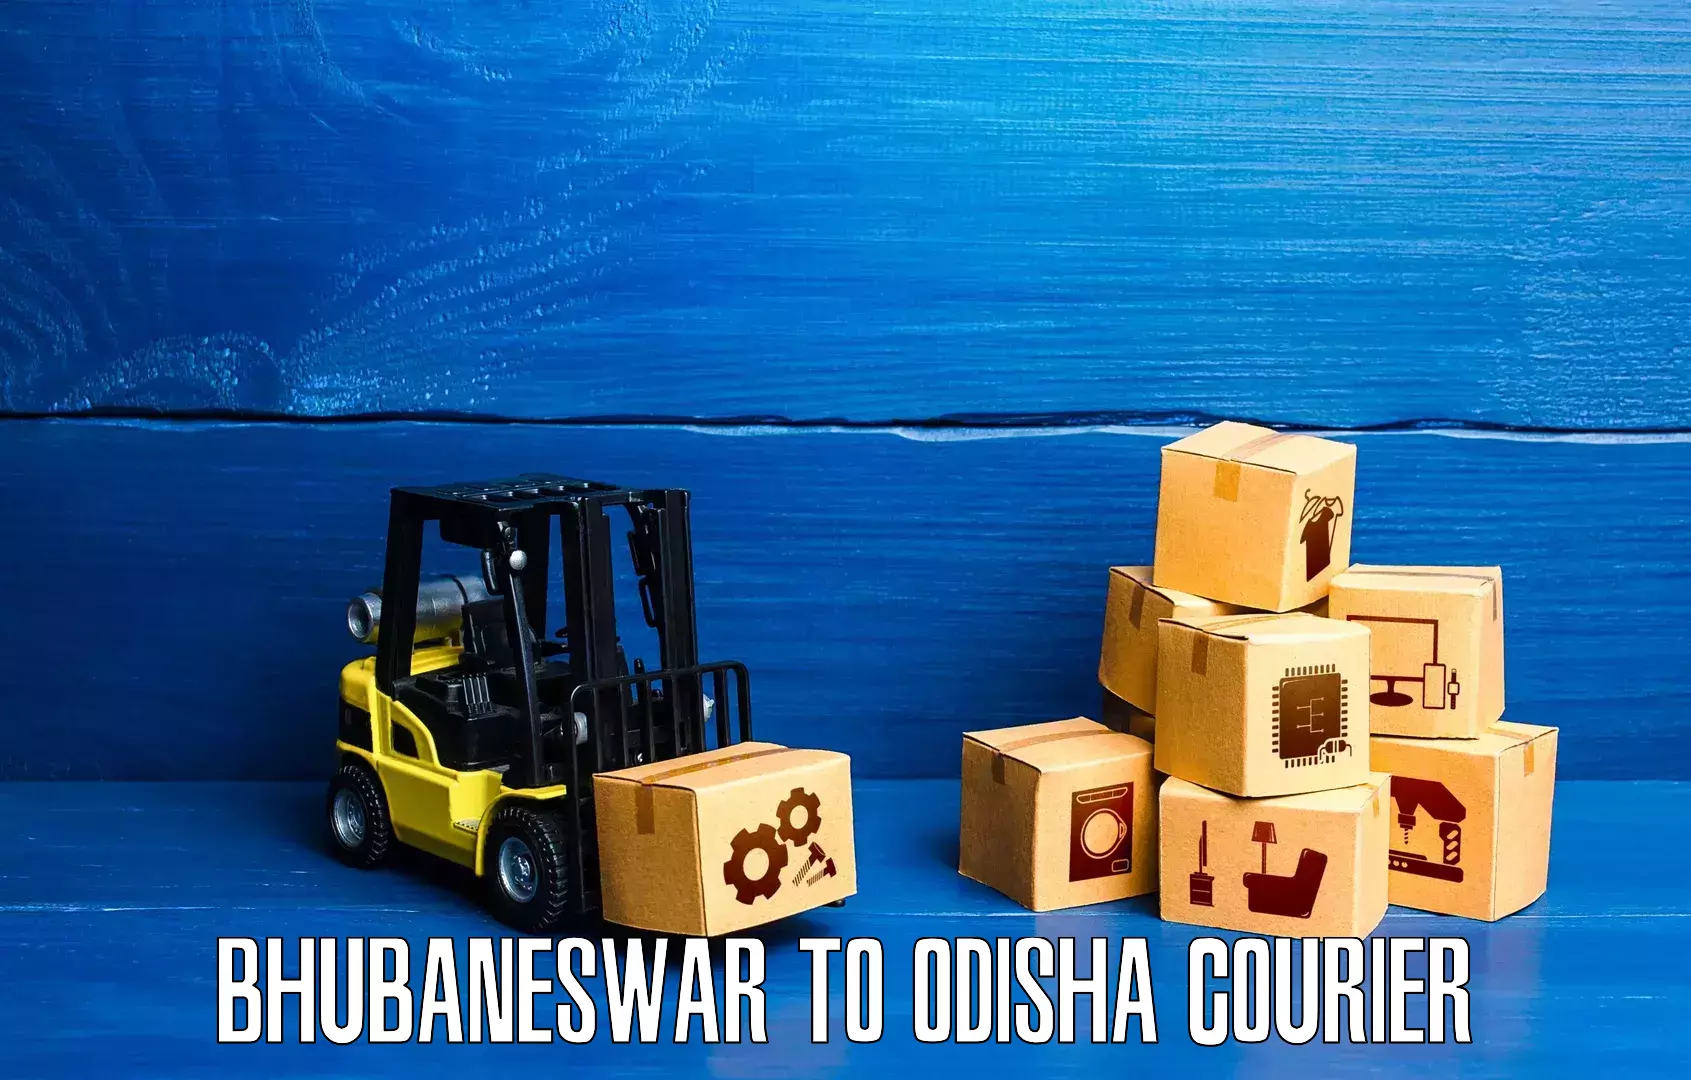 State-of-the-art courier technology Bhubaneswar to Balugaon